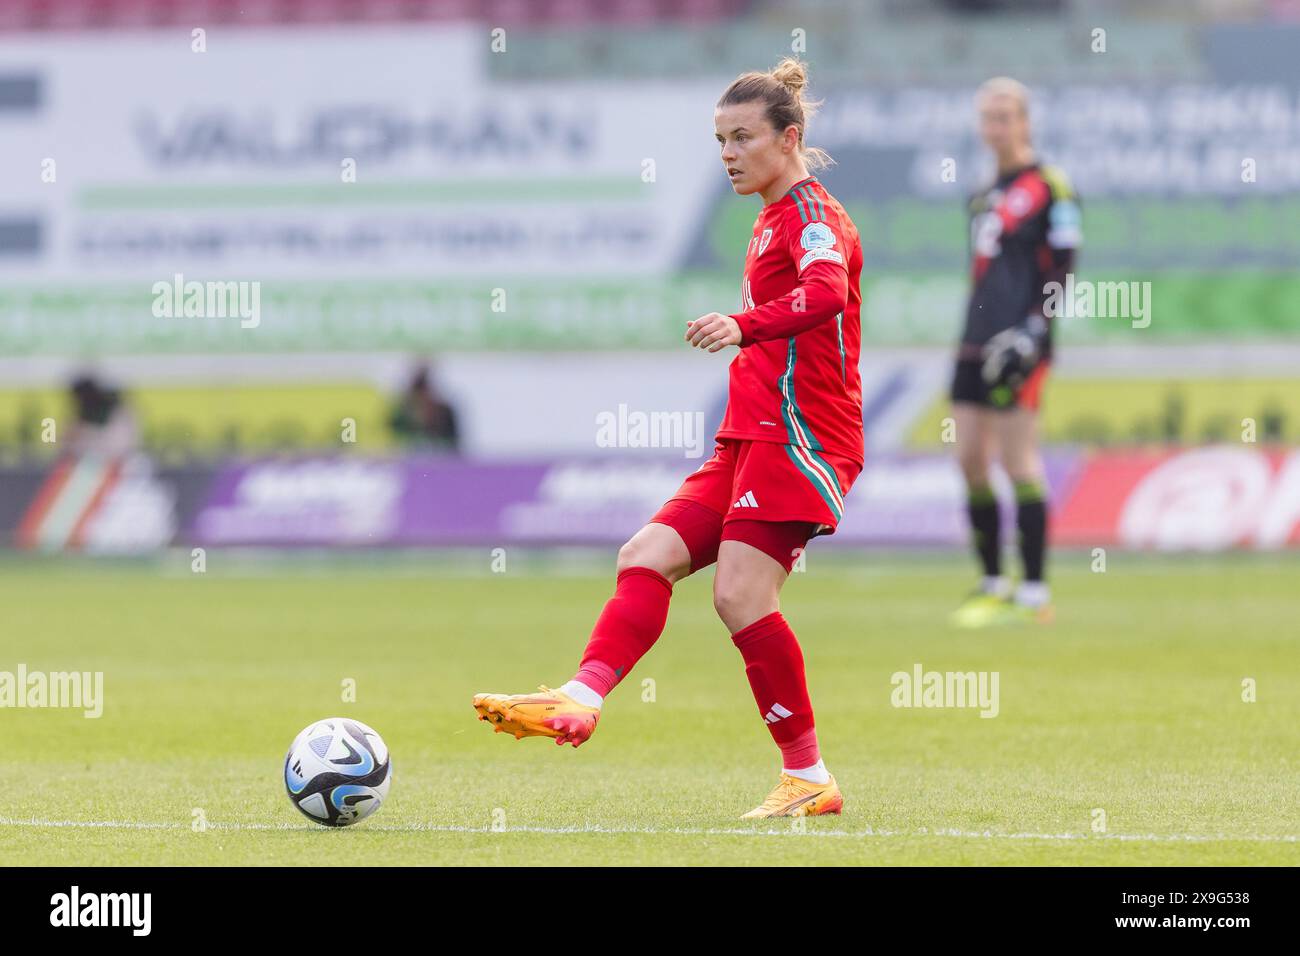 LLANELLI, WALES - 31 MAY 2024: Wales' Hayley Ladd during the UEFA Women’s Euro 2025 qualifier League B match between Wales Women and Ukraine Women at Parc y Scarlets in Llanelli on the 31st of May 2024. (Pic by John Smith/FAW) Stock Photo